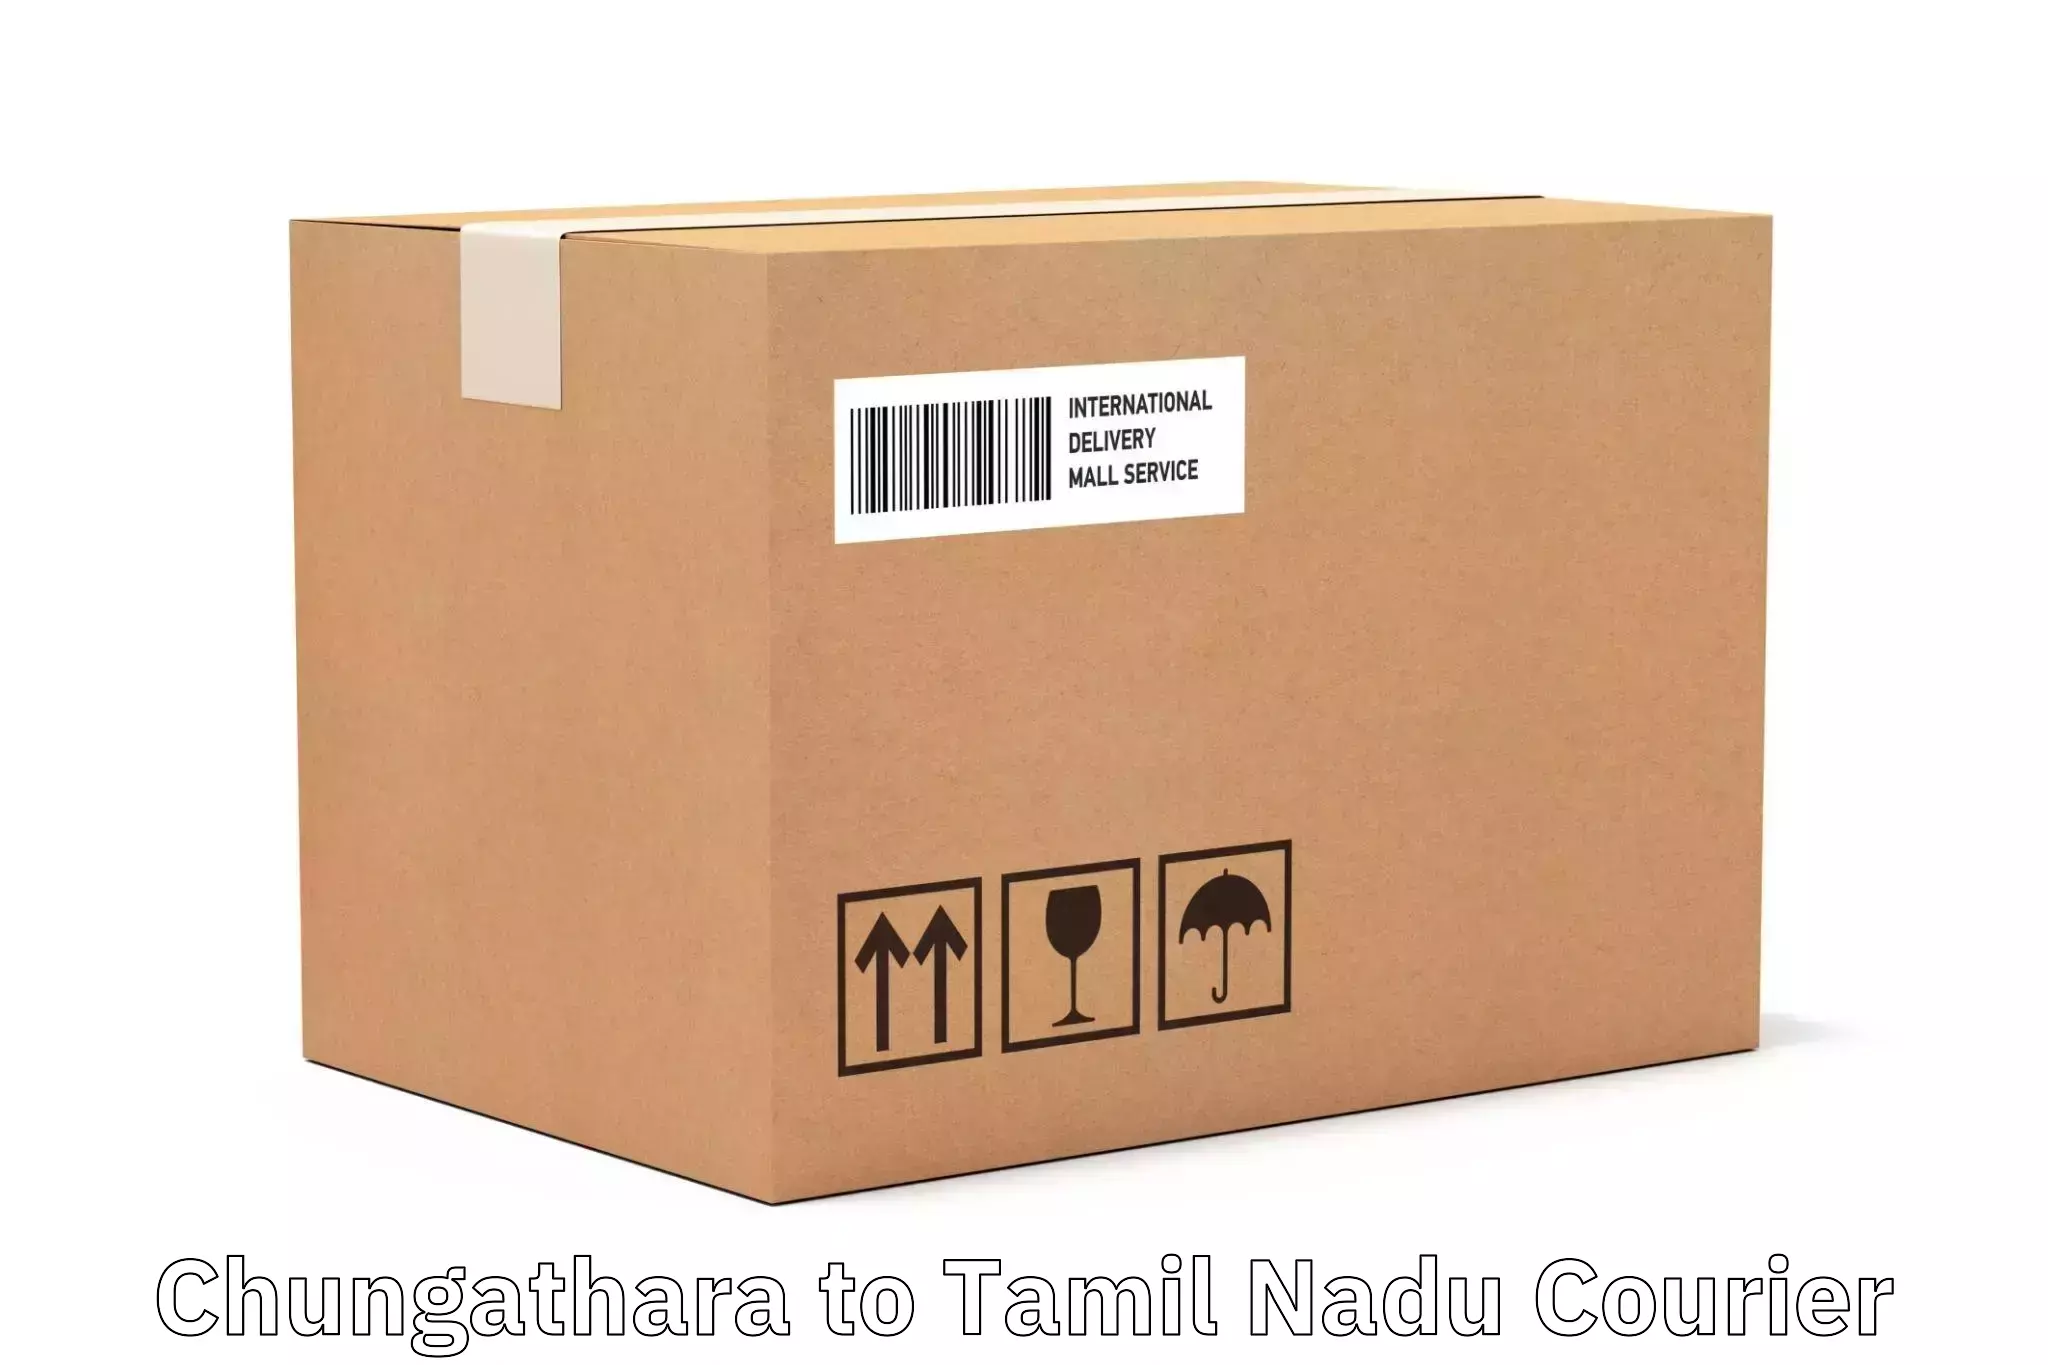 Rural area delivery in Chungathara to Ambattur